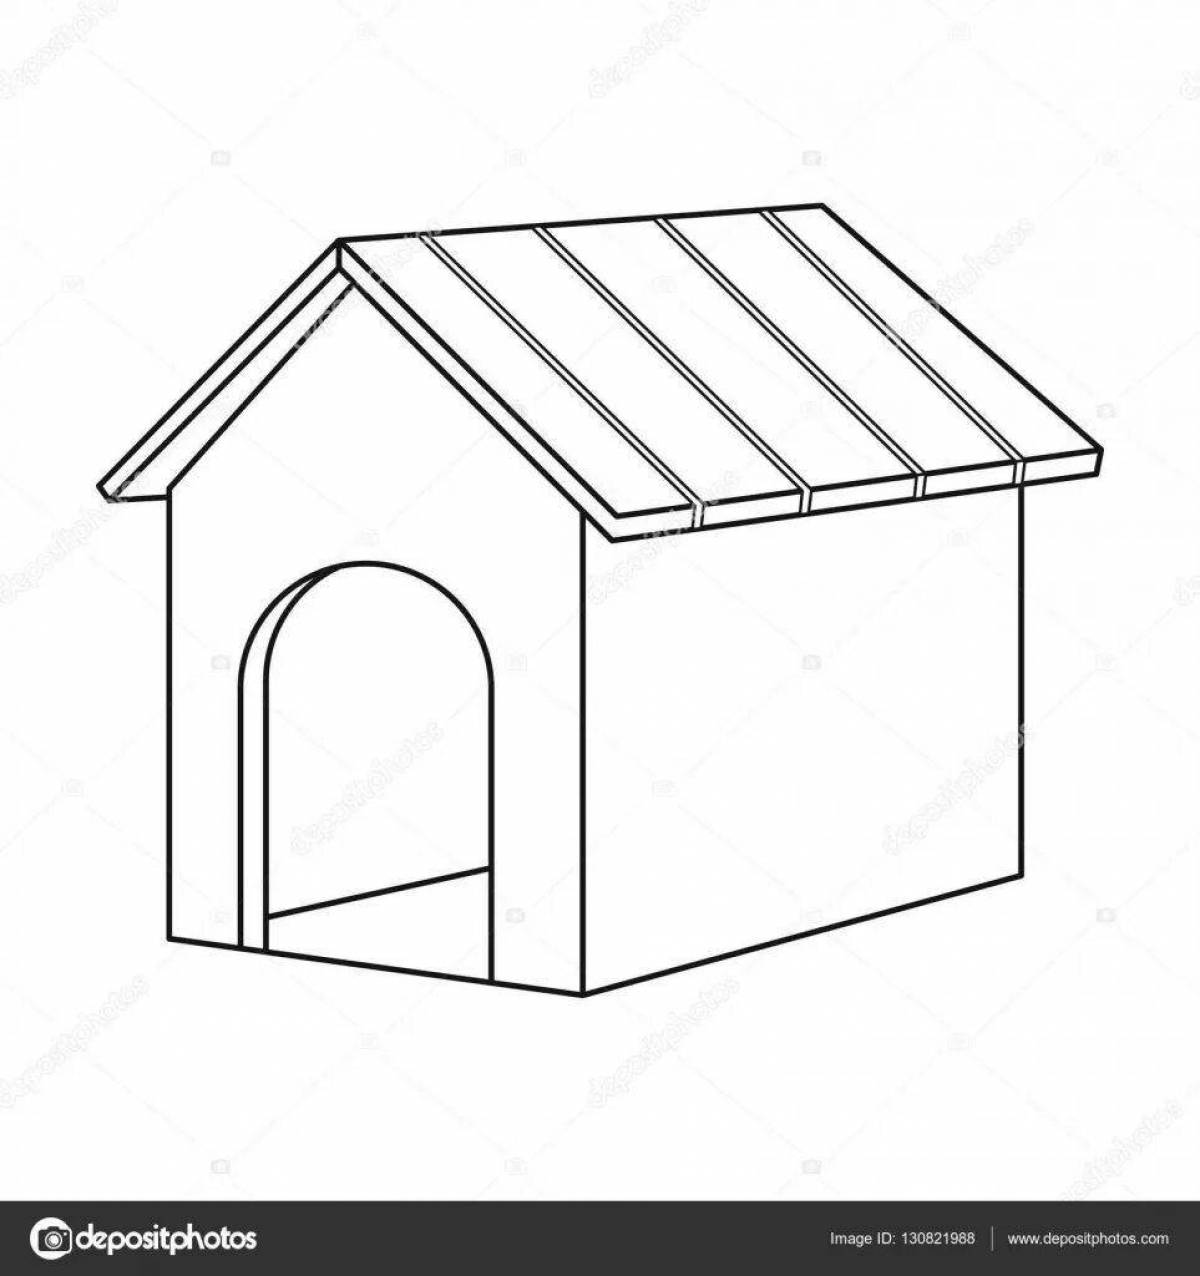 Fairytale doghouse coloring page